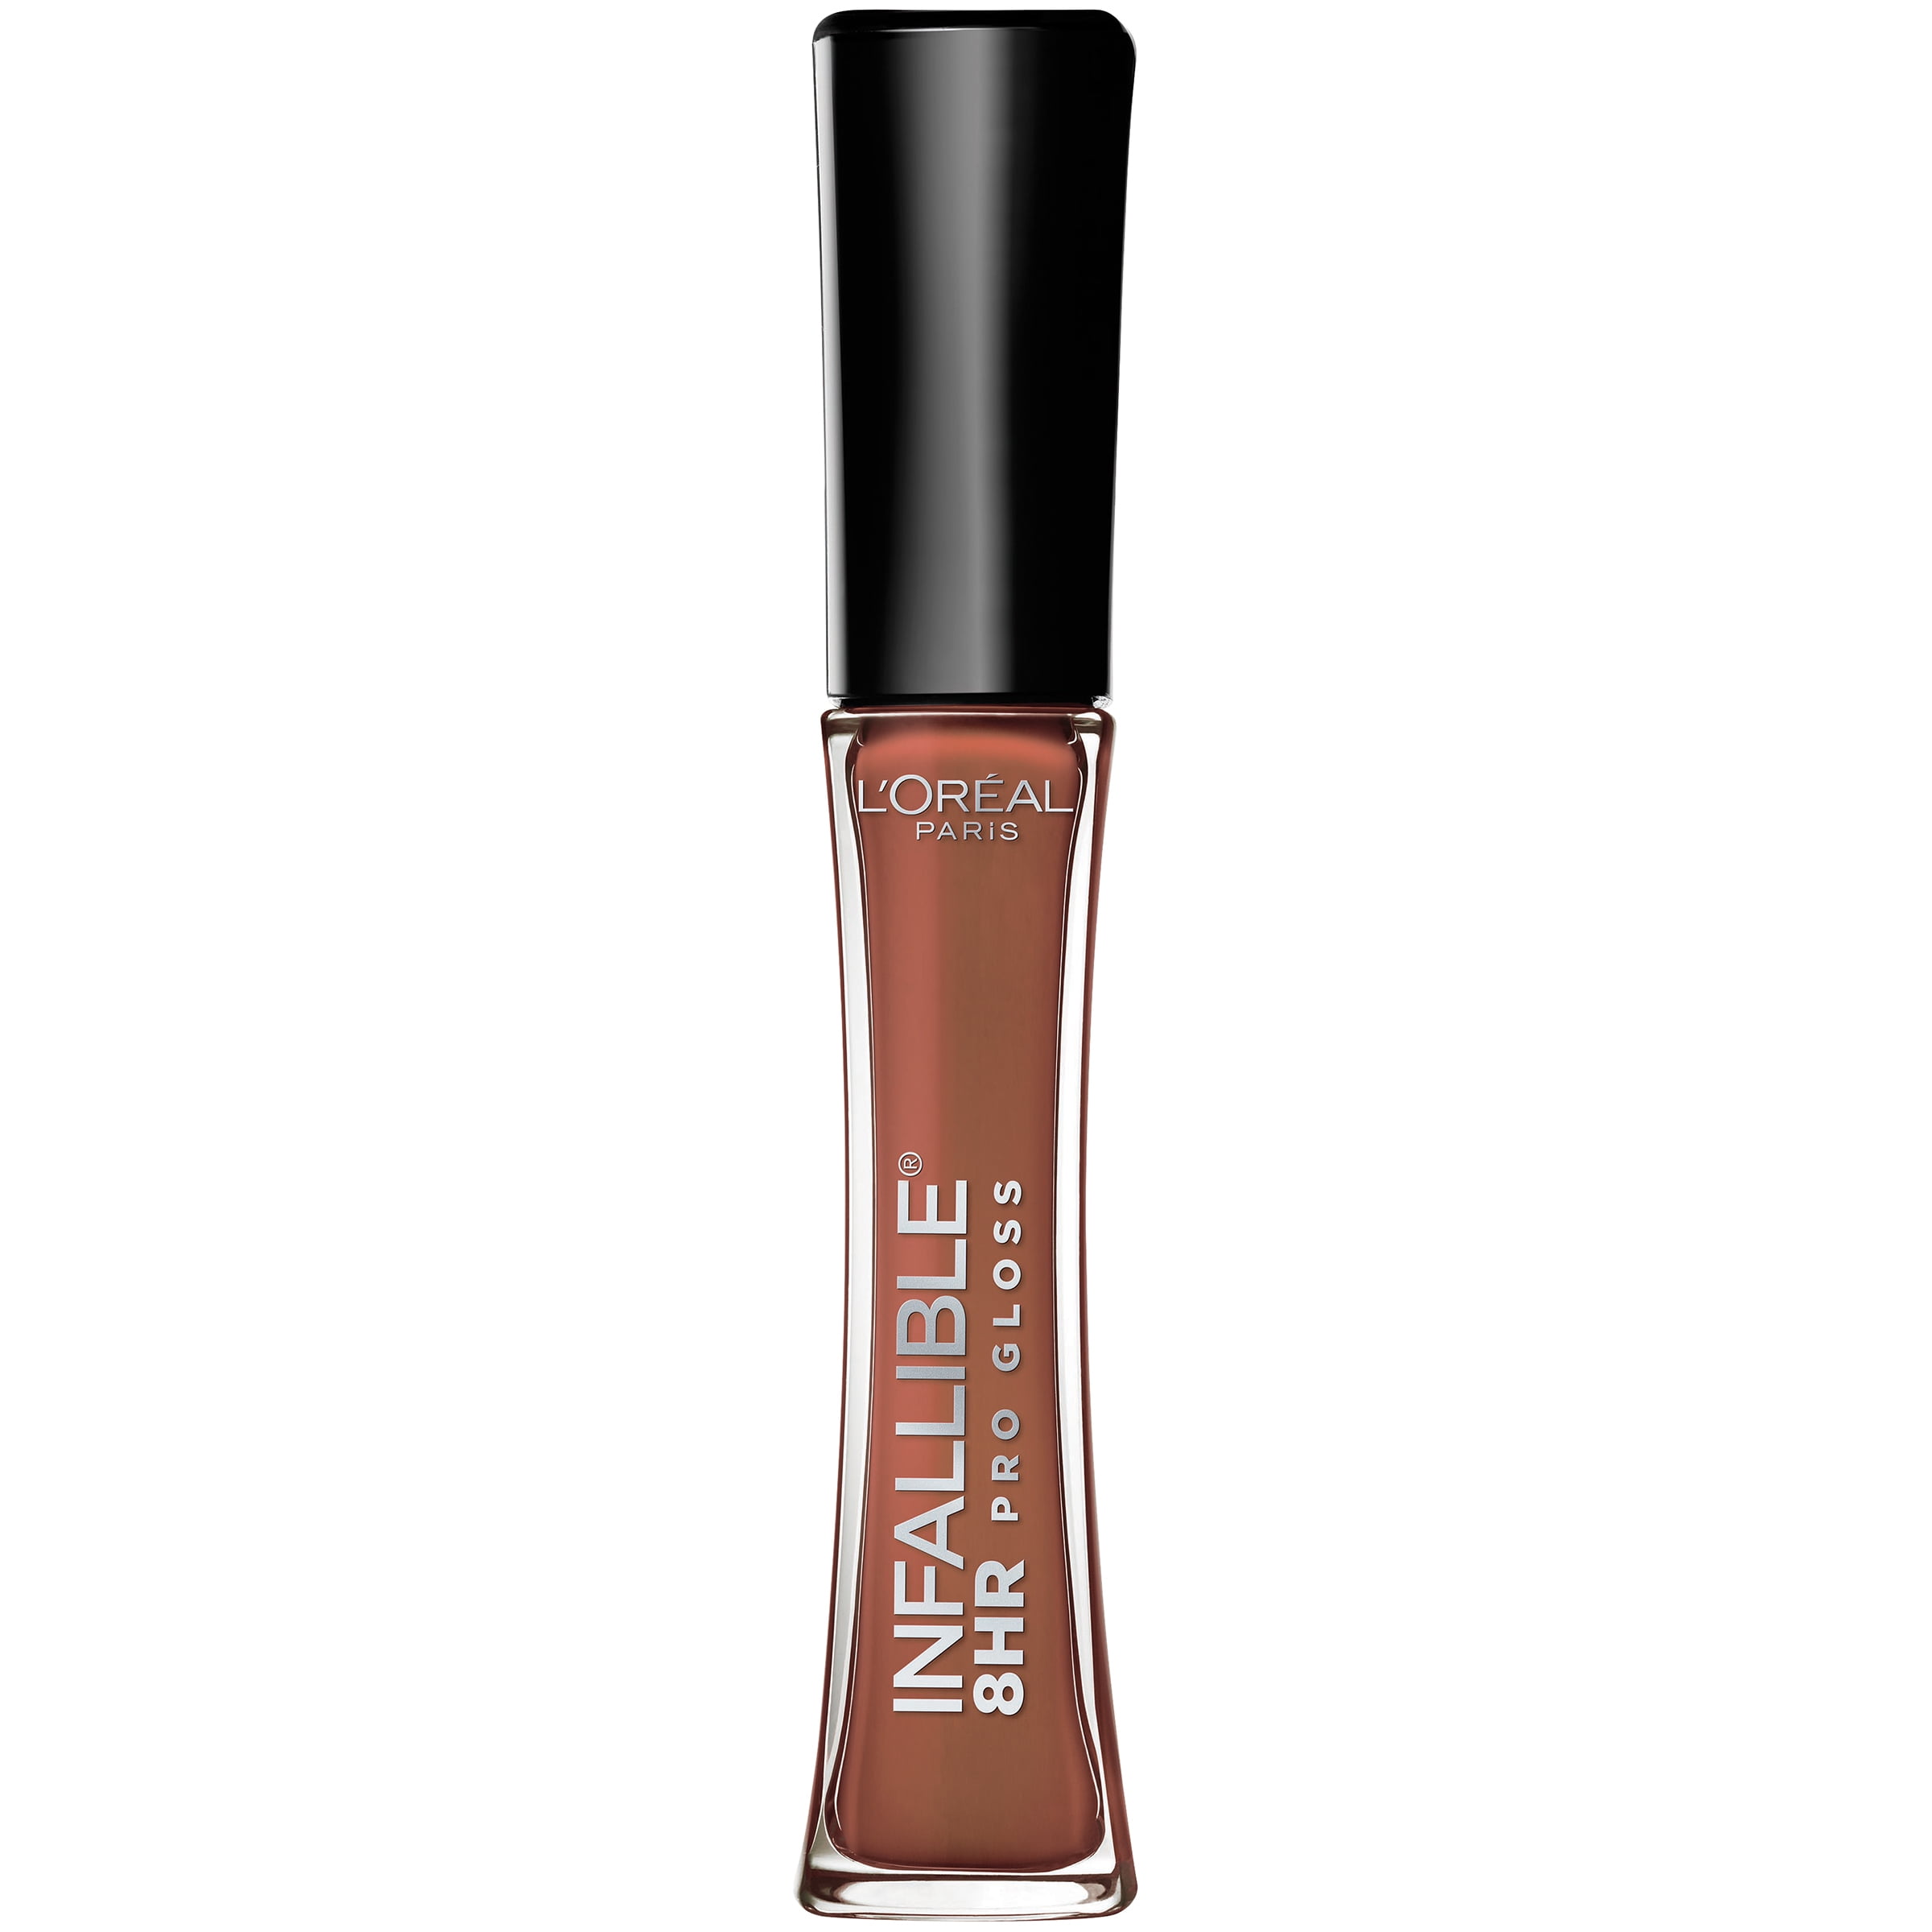 LOreal Paris Infallible 8 HR Pro Gloss Barely Nude Review